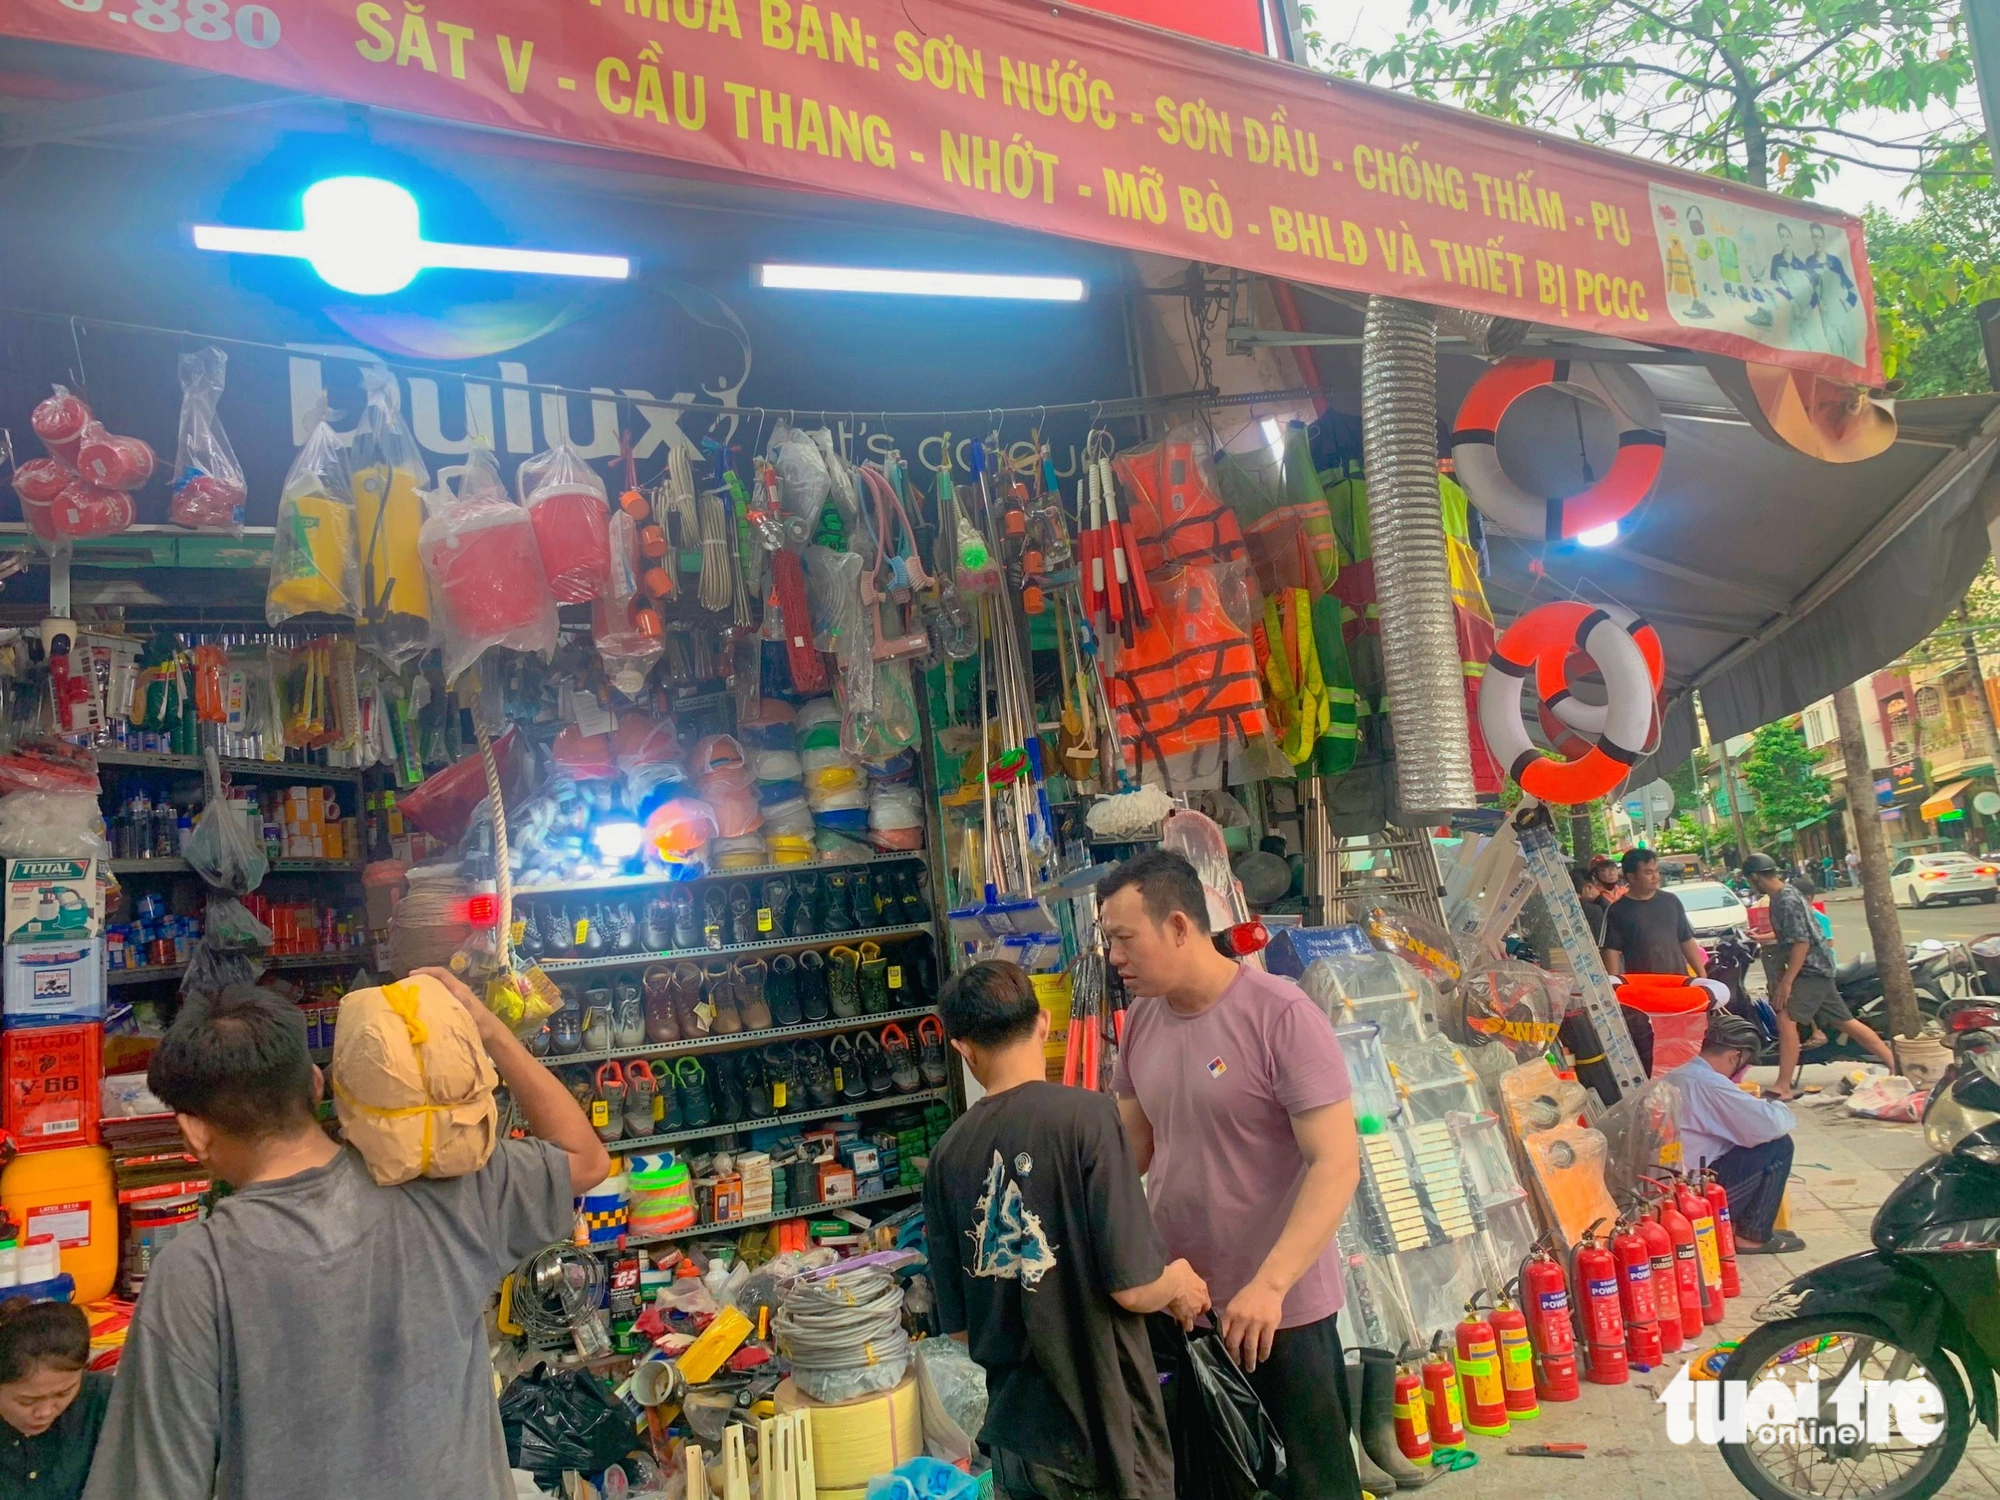 Fire safety equipment sells like hot cakes in Ho Chi Minh City ...